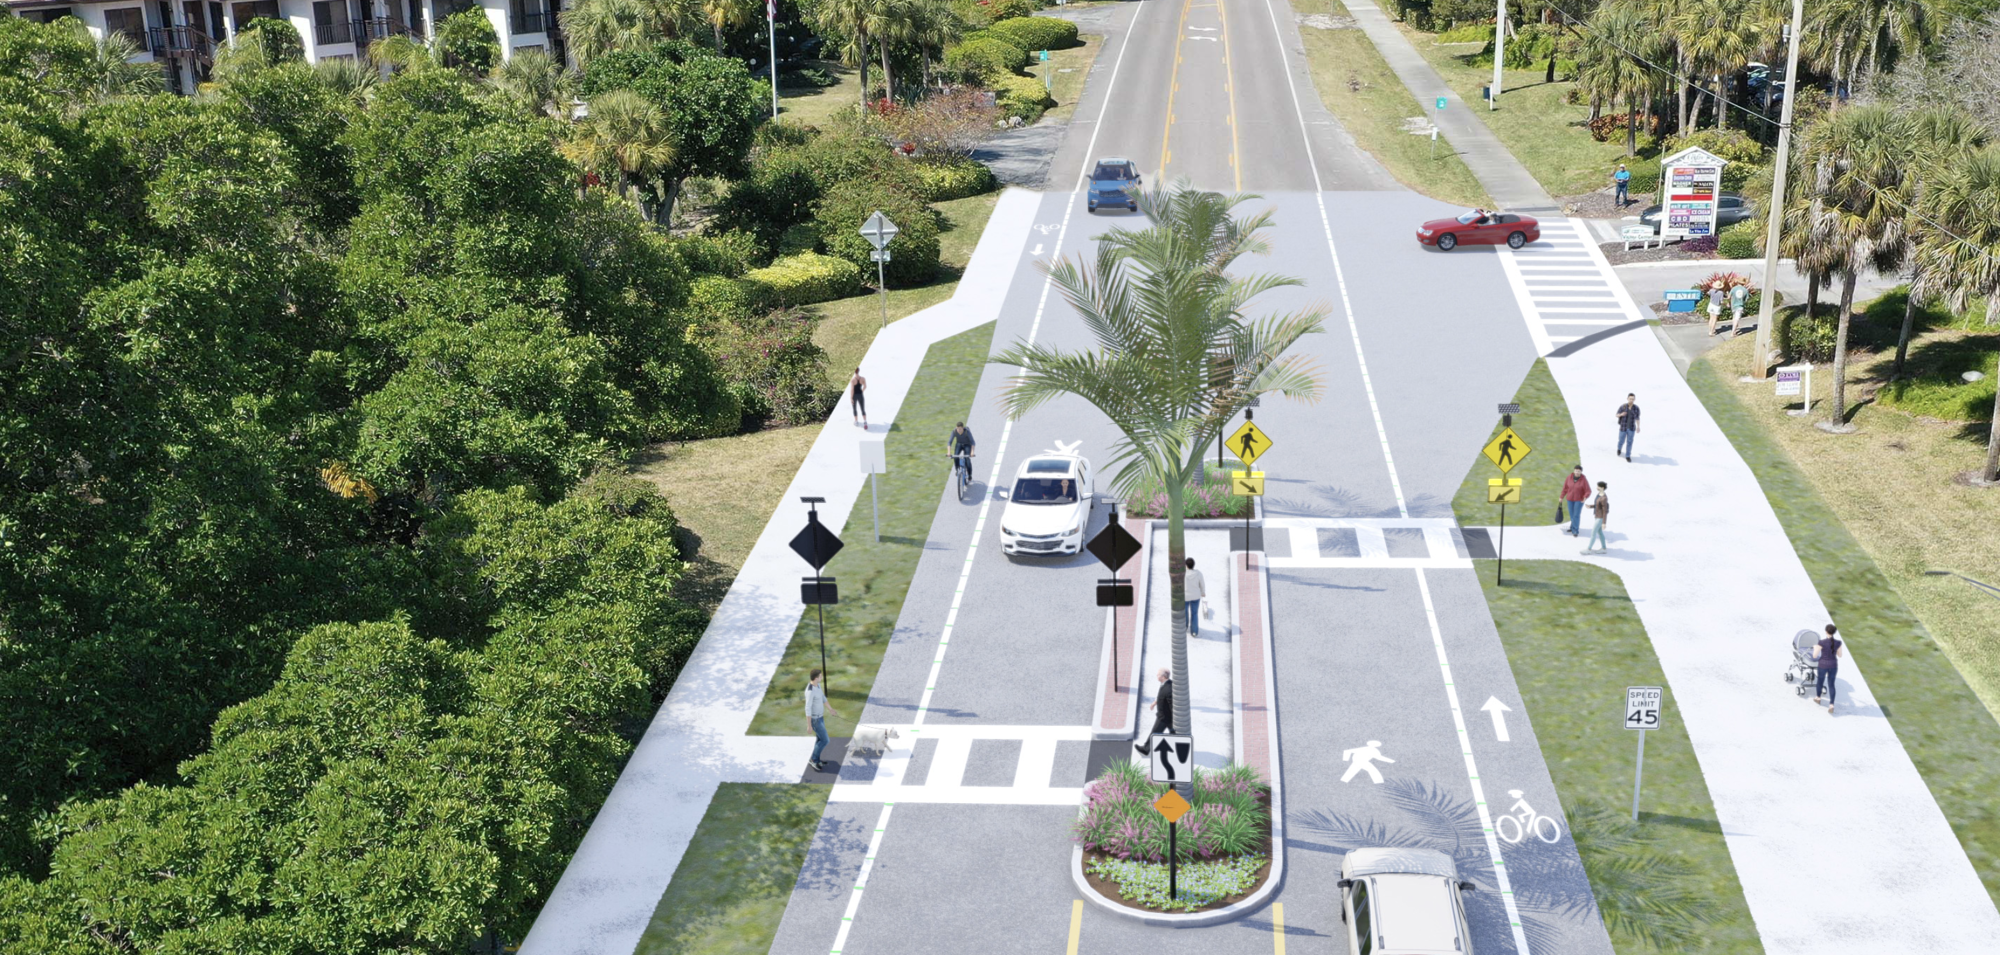 An example of a proposed mid-island switchback crosswalk with a median.